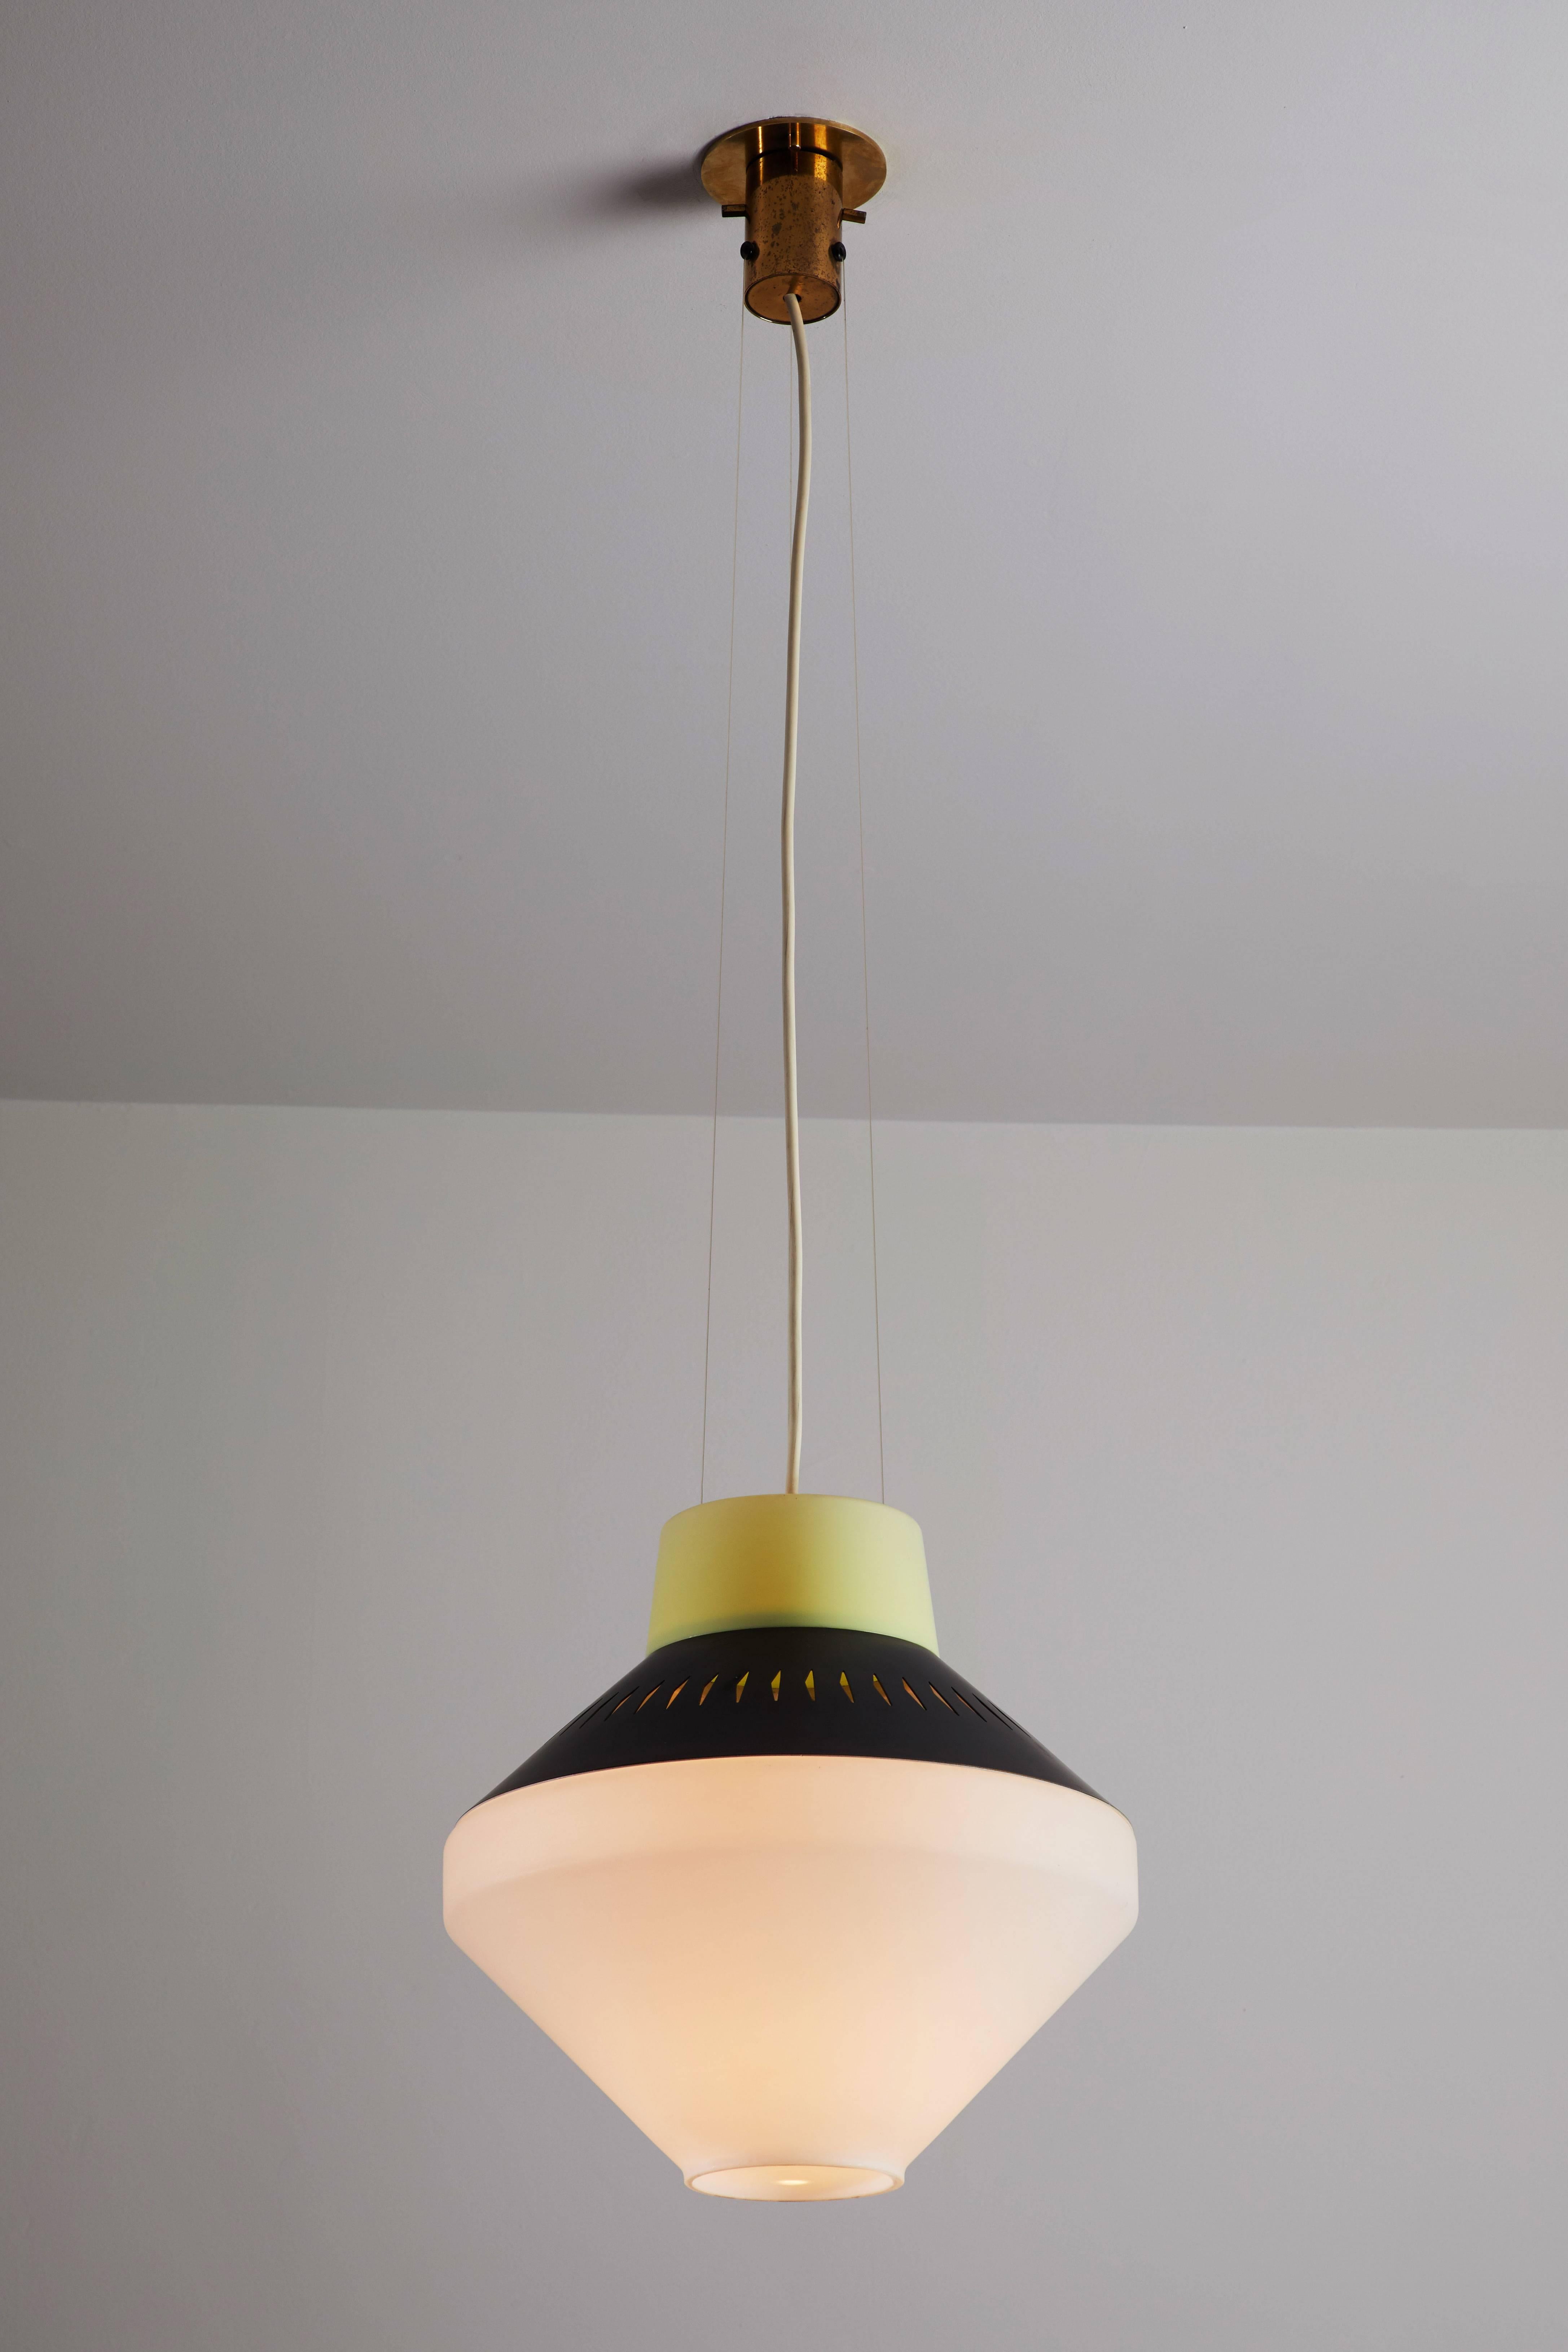 Painted metal and opaline glass pendant manufactured by Stilnovo in Italy, circa 1940s. Brass canopy. Wired for US junction boxes. Nylon cord. Overall drop can be adjusted. Takes one E27 100w maximum bulb.